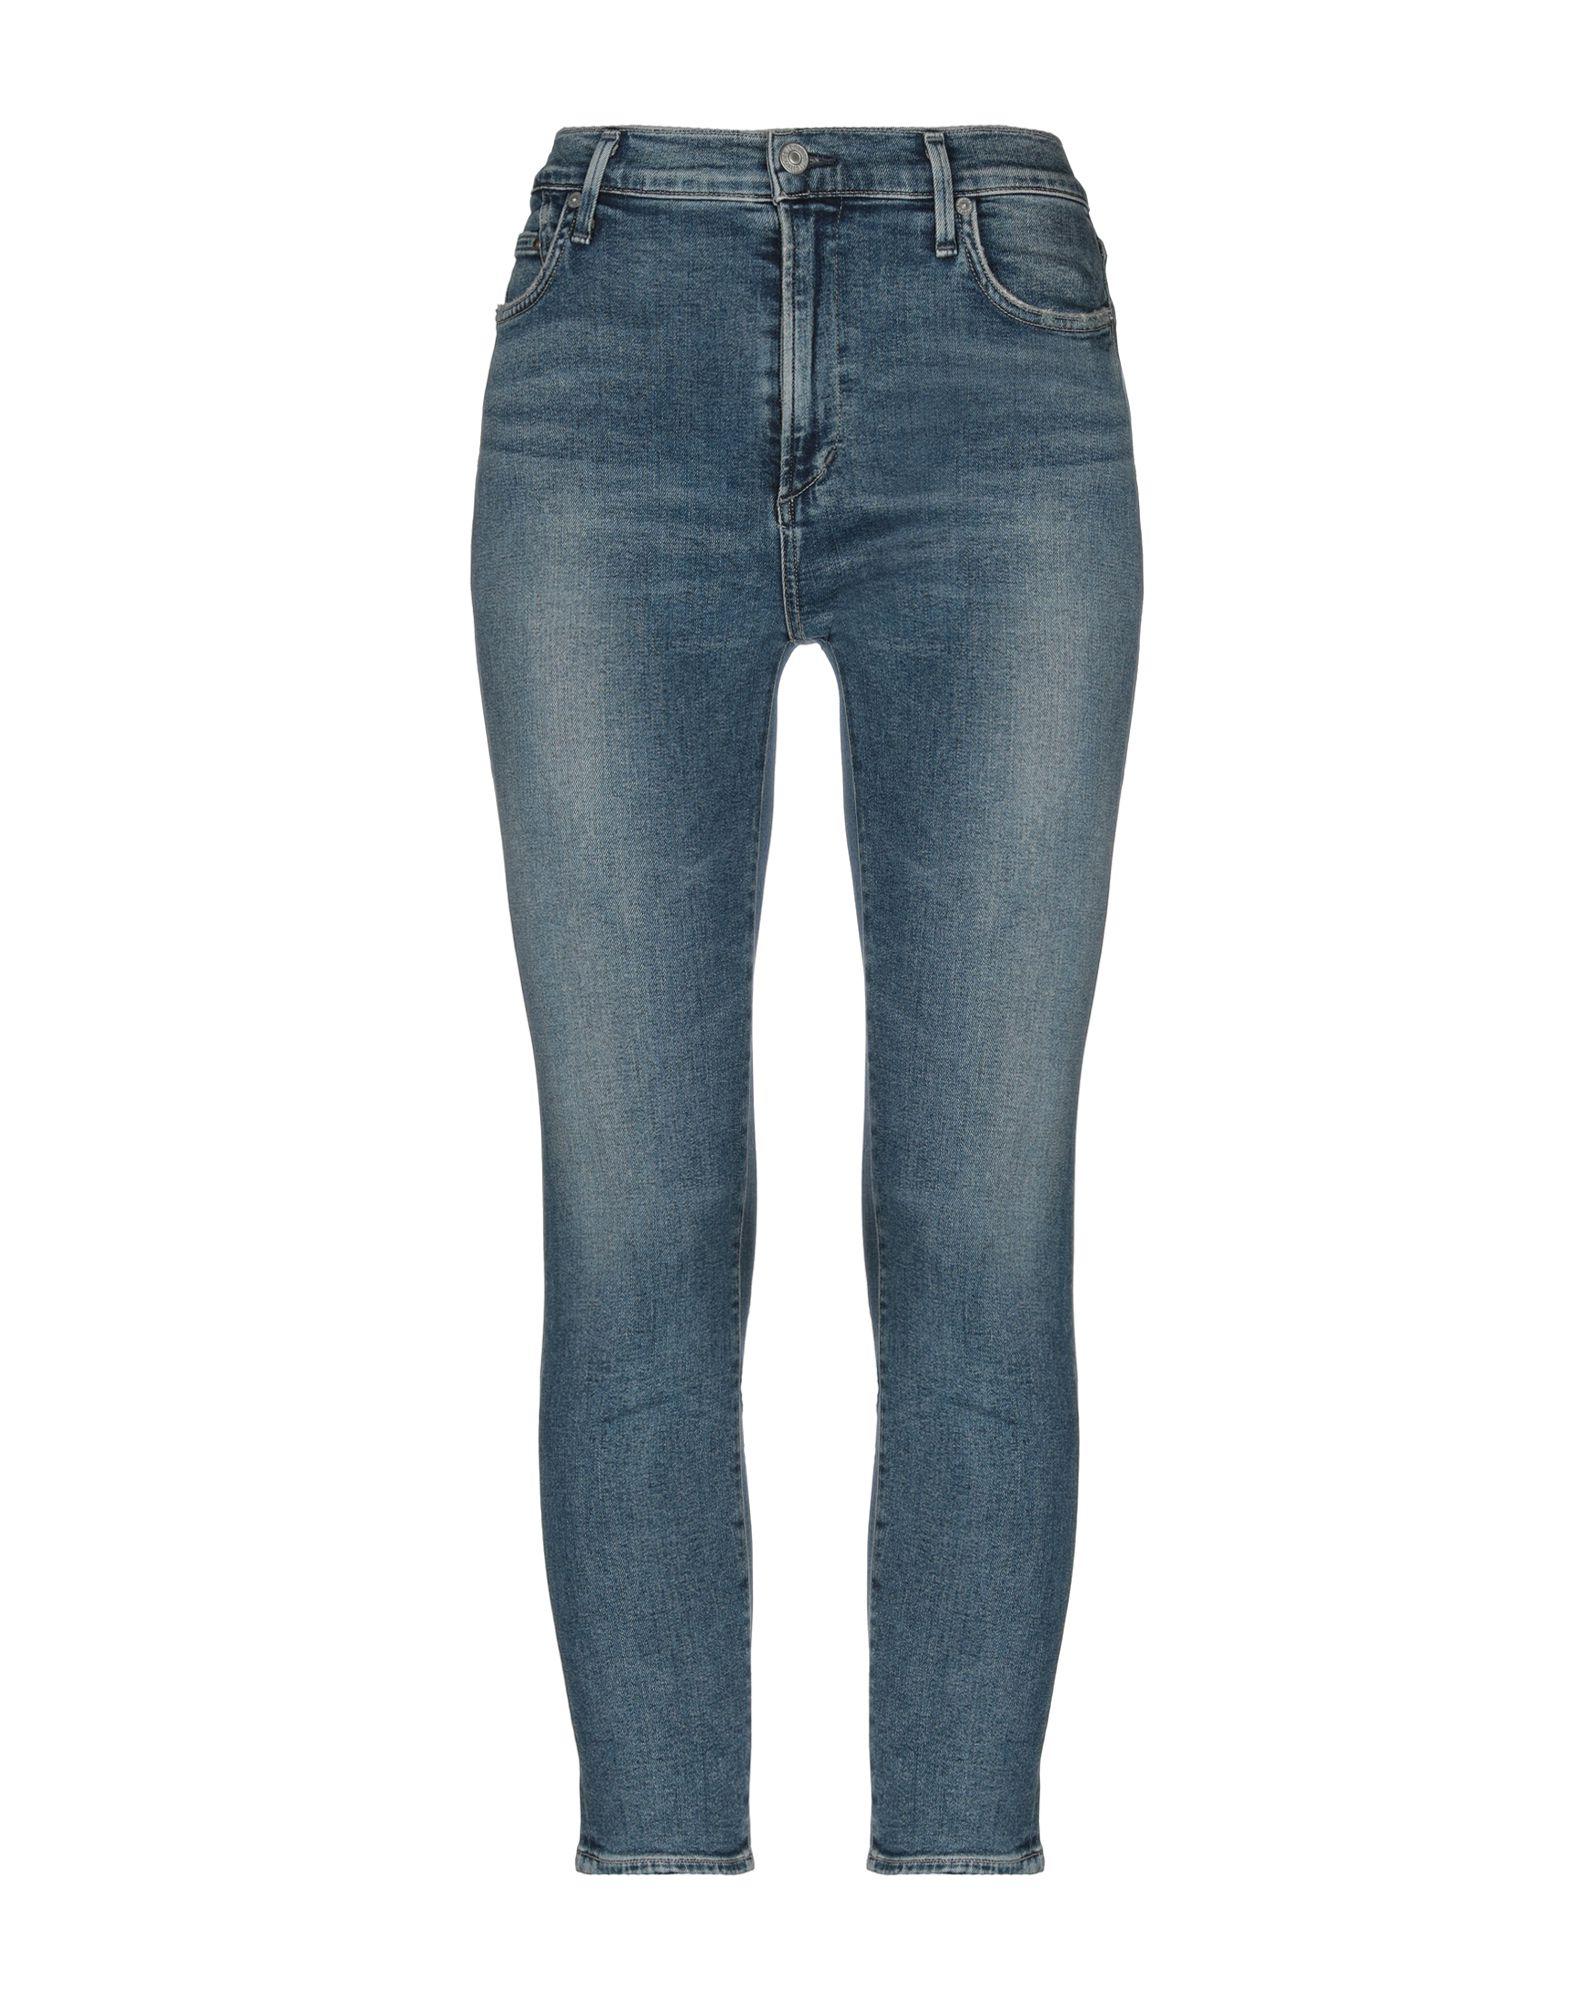 Citizens of Humanity Denim Pants in Blue - Lyst